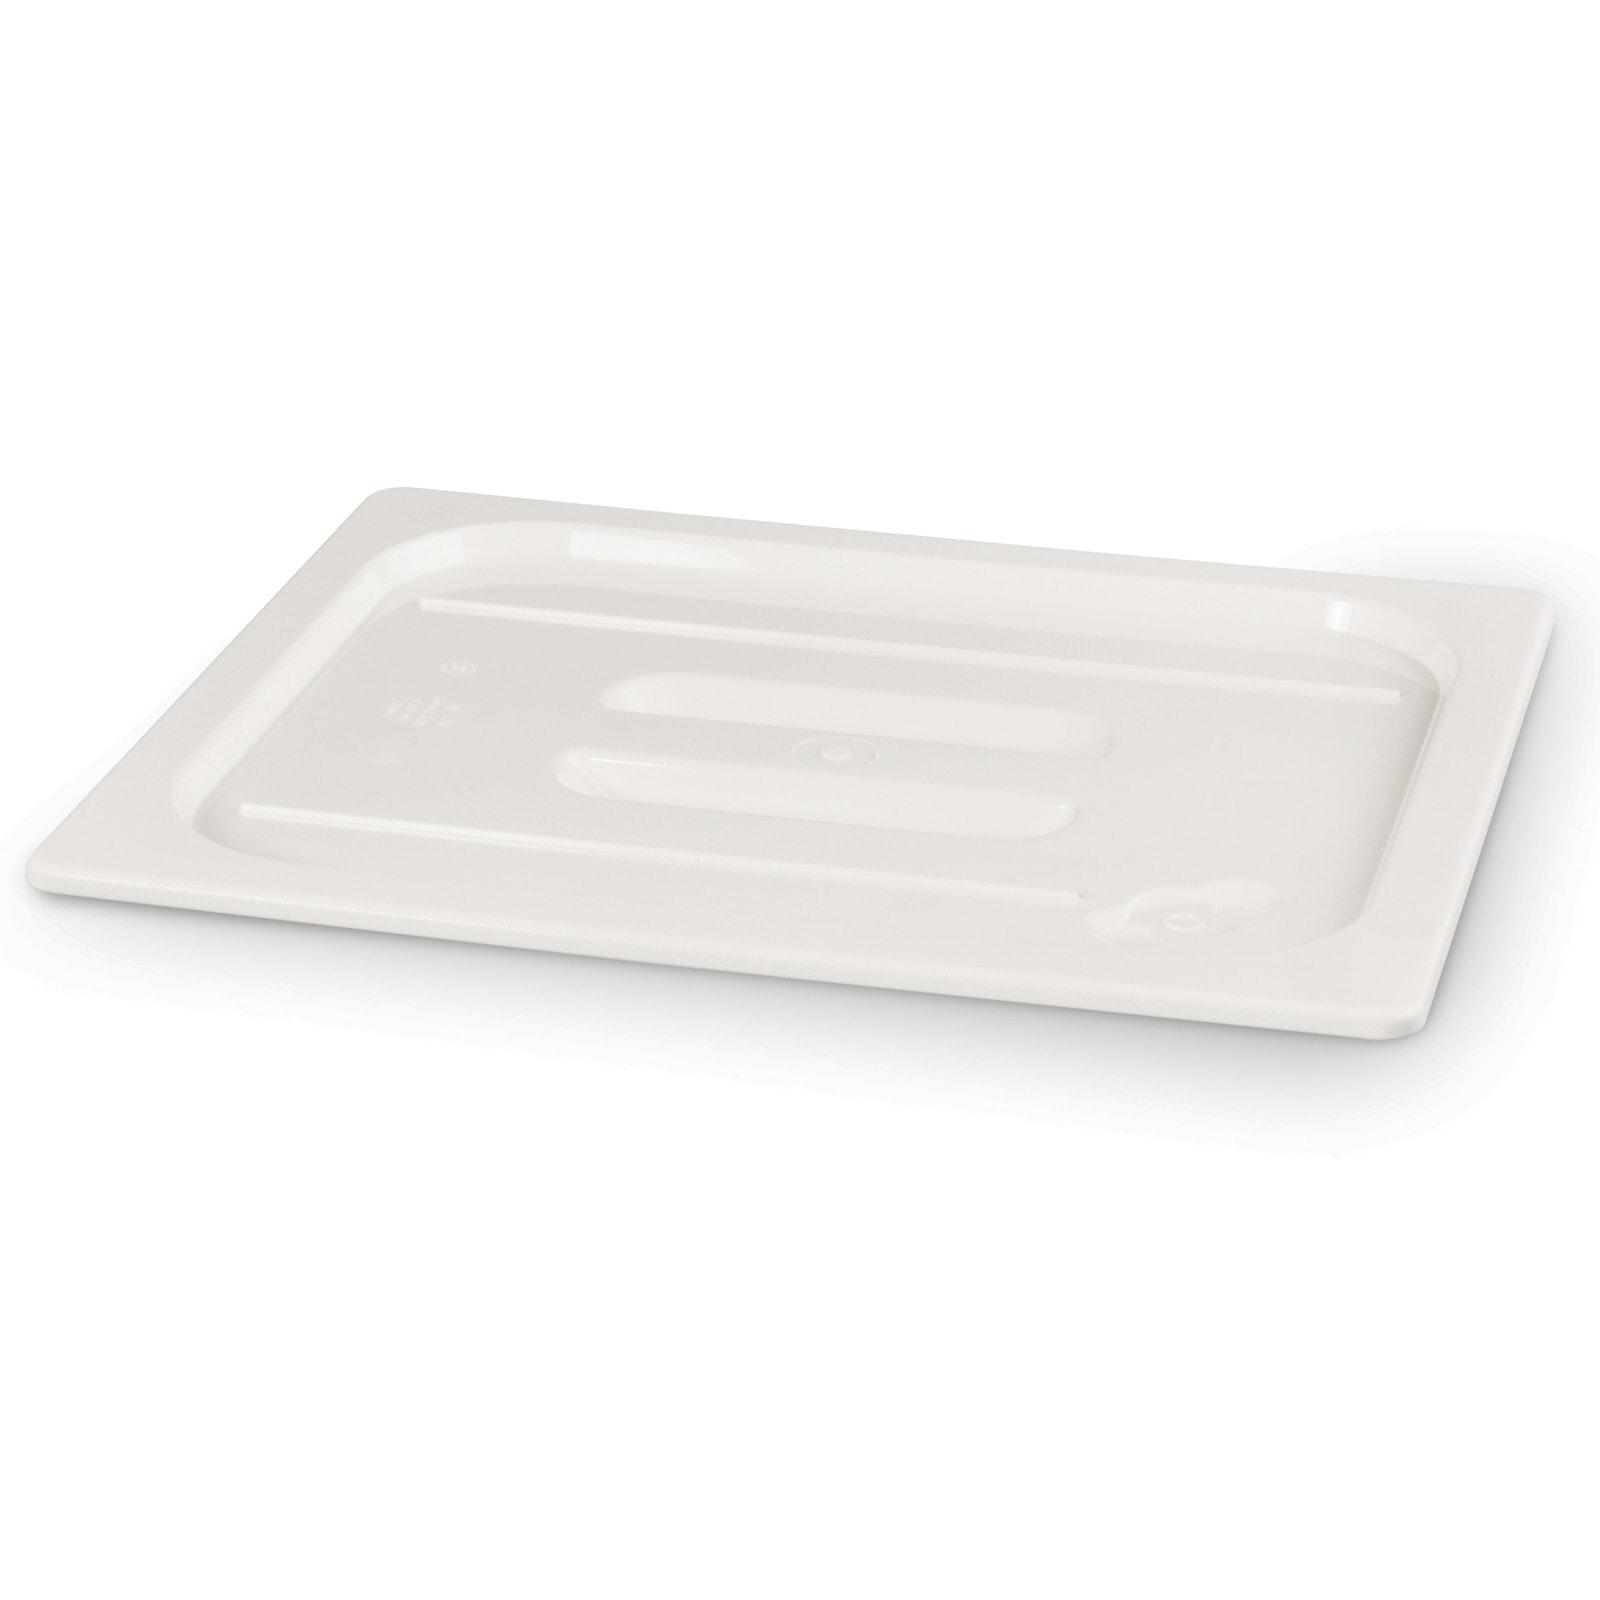 White polycarbonate lid for GN 1/3 containers - Hendi 862971